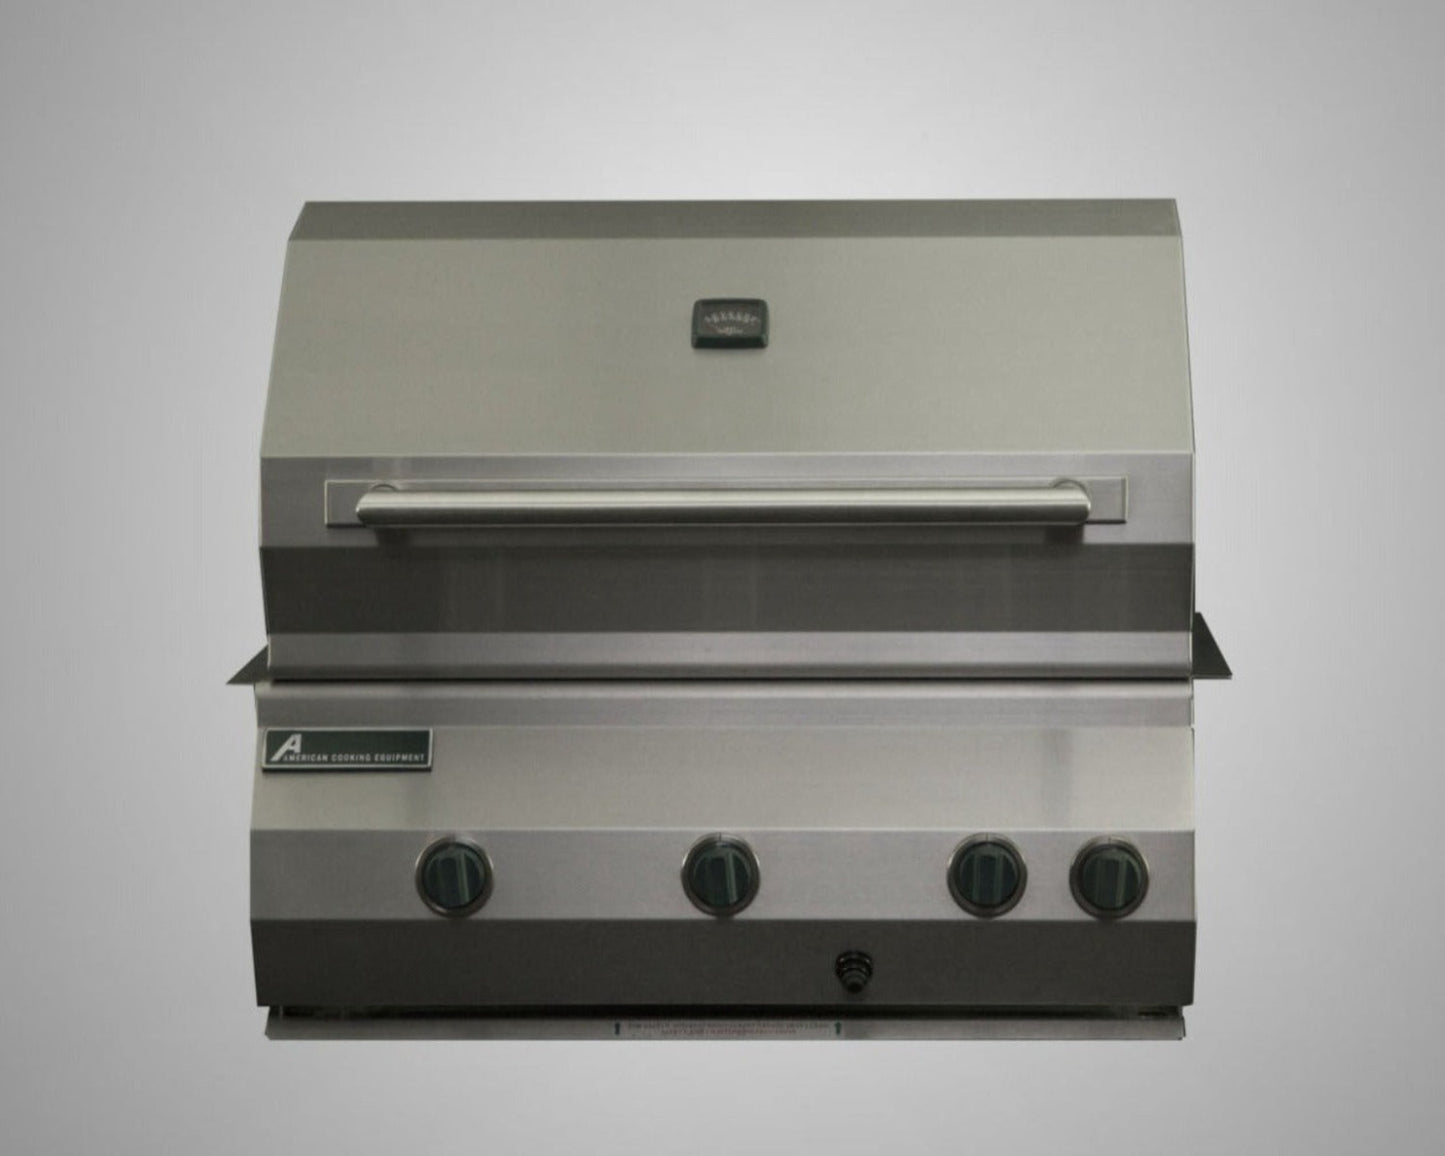 6 Burner Built-In Grill with Rotisserie